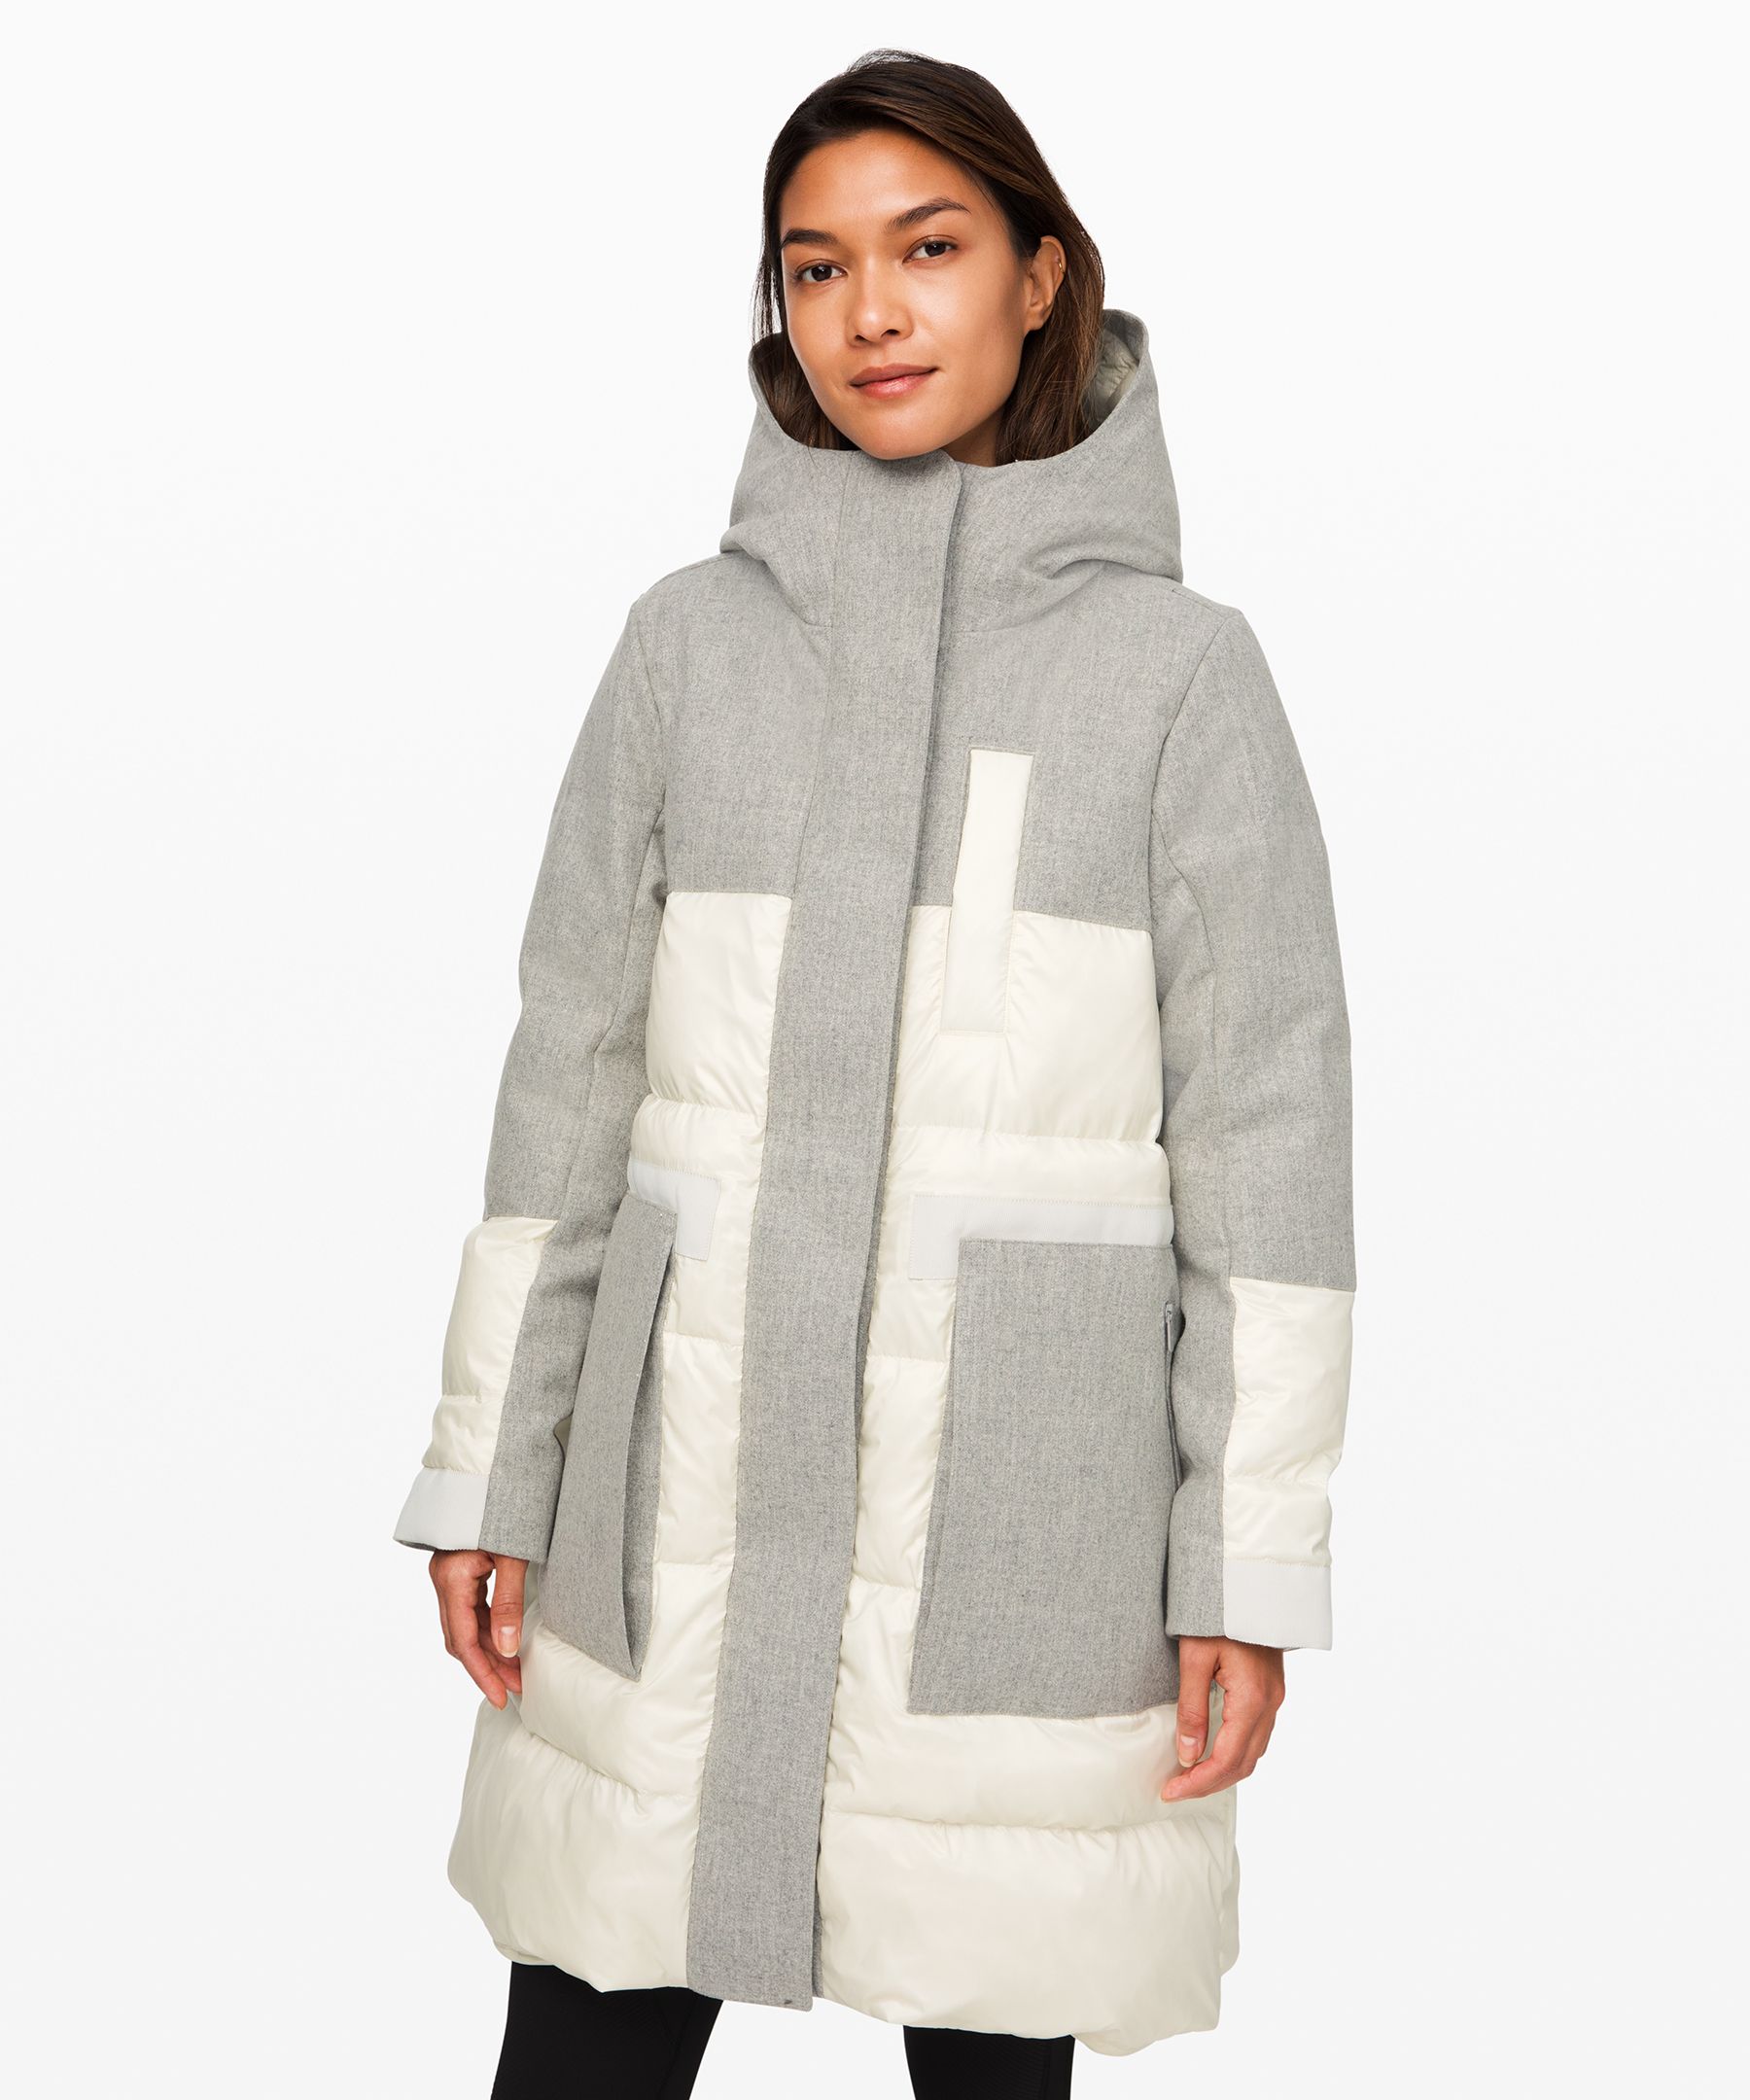 Lululemon Winter Chill Wool Parka In Heathered Silver Graphite/light Ivory